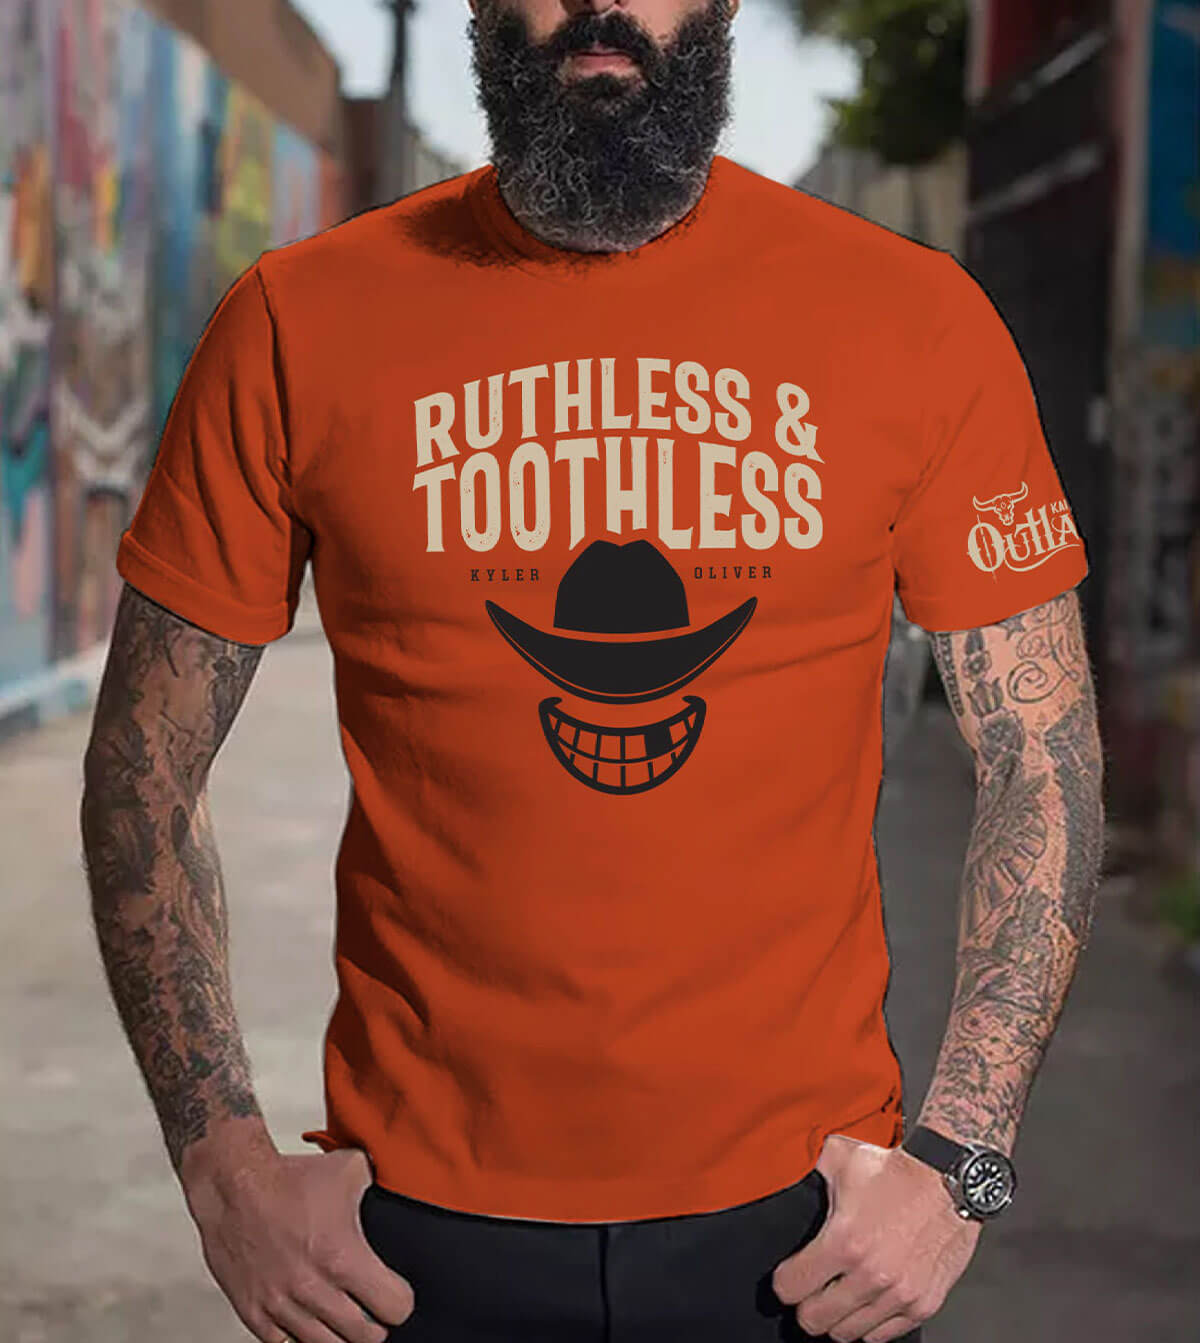 Front view of the "Ruthless and Toothless" t-shirt.